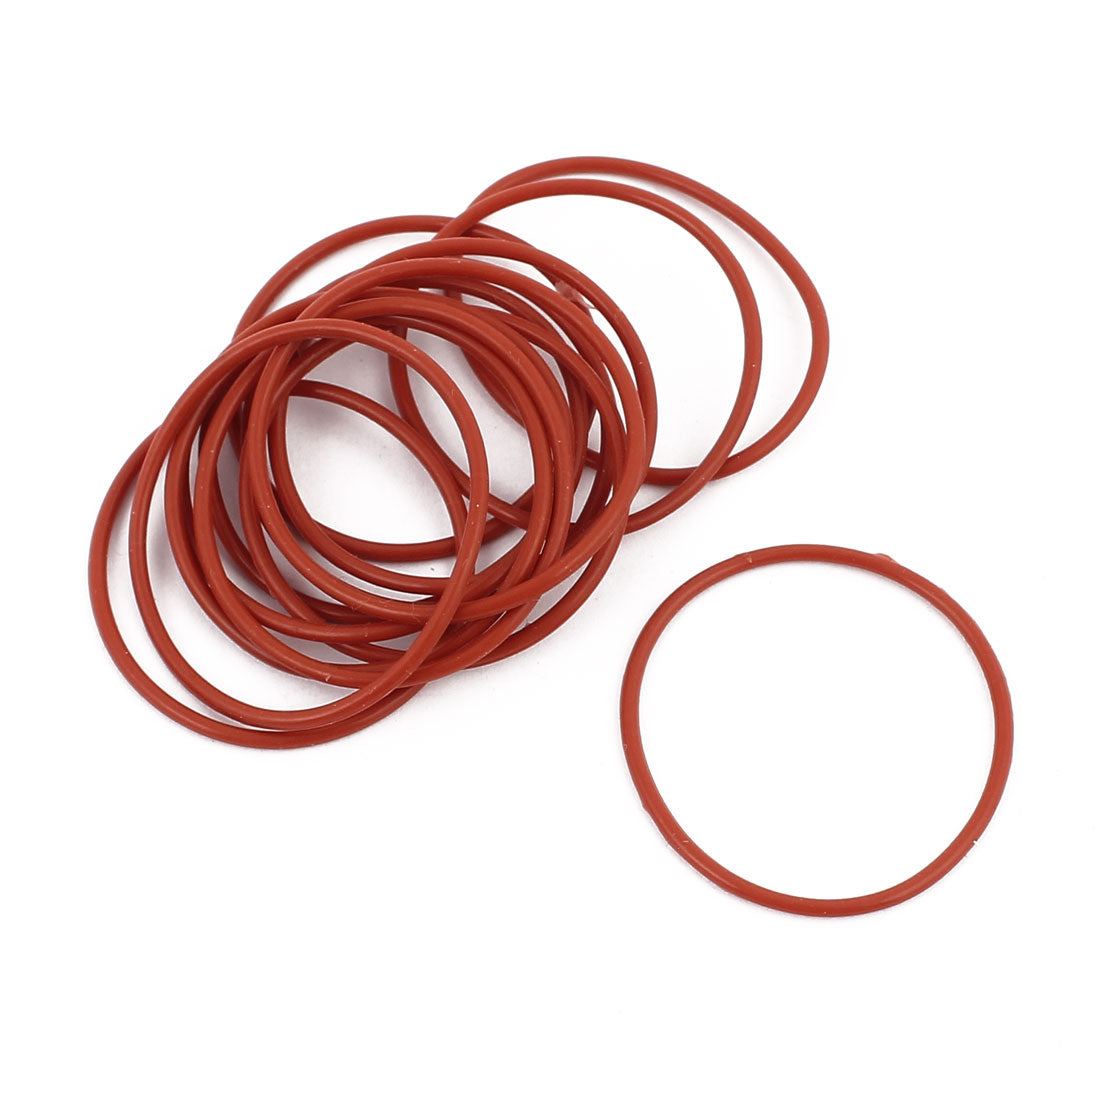 uxcell Uxcell 15Pcs 32mm x 1.5mm Rubber O-rings NBR Heat Resistant Sealing Ring Grommets Red